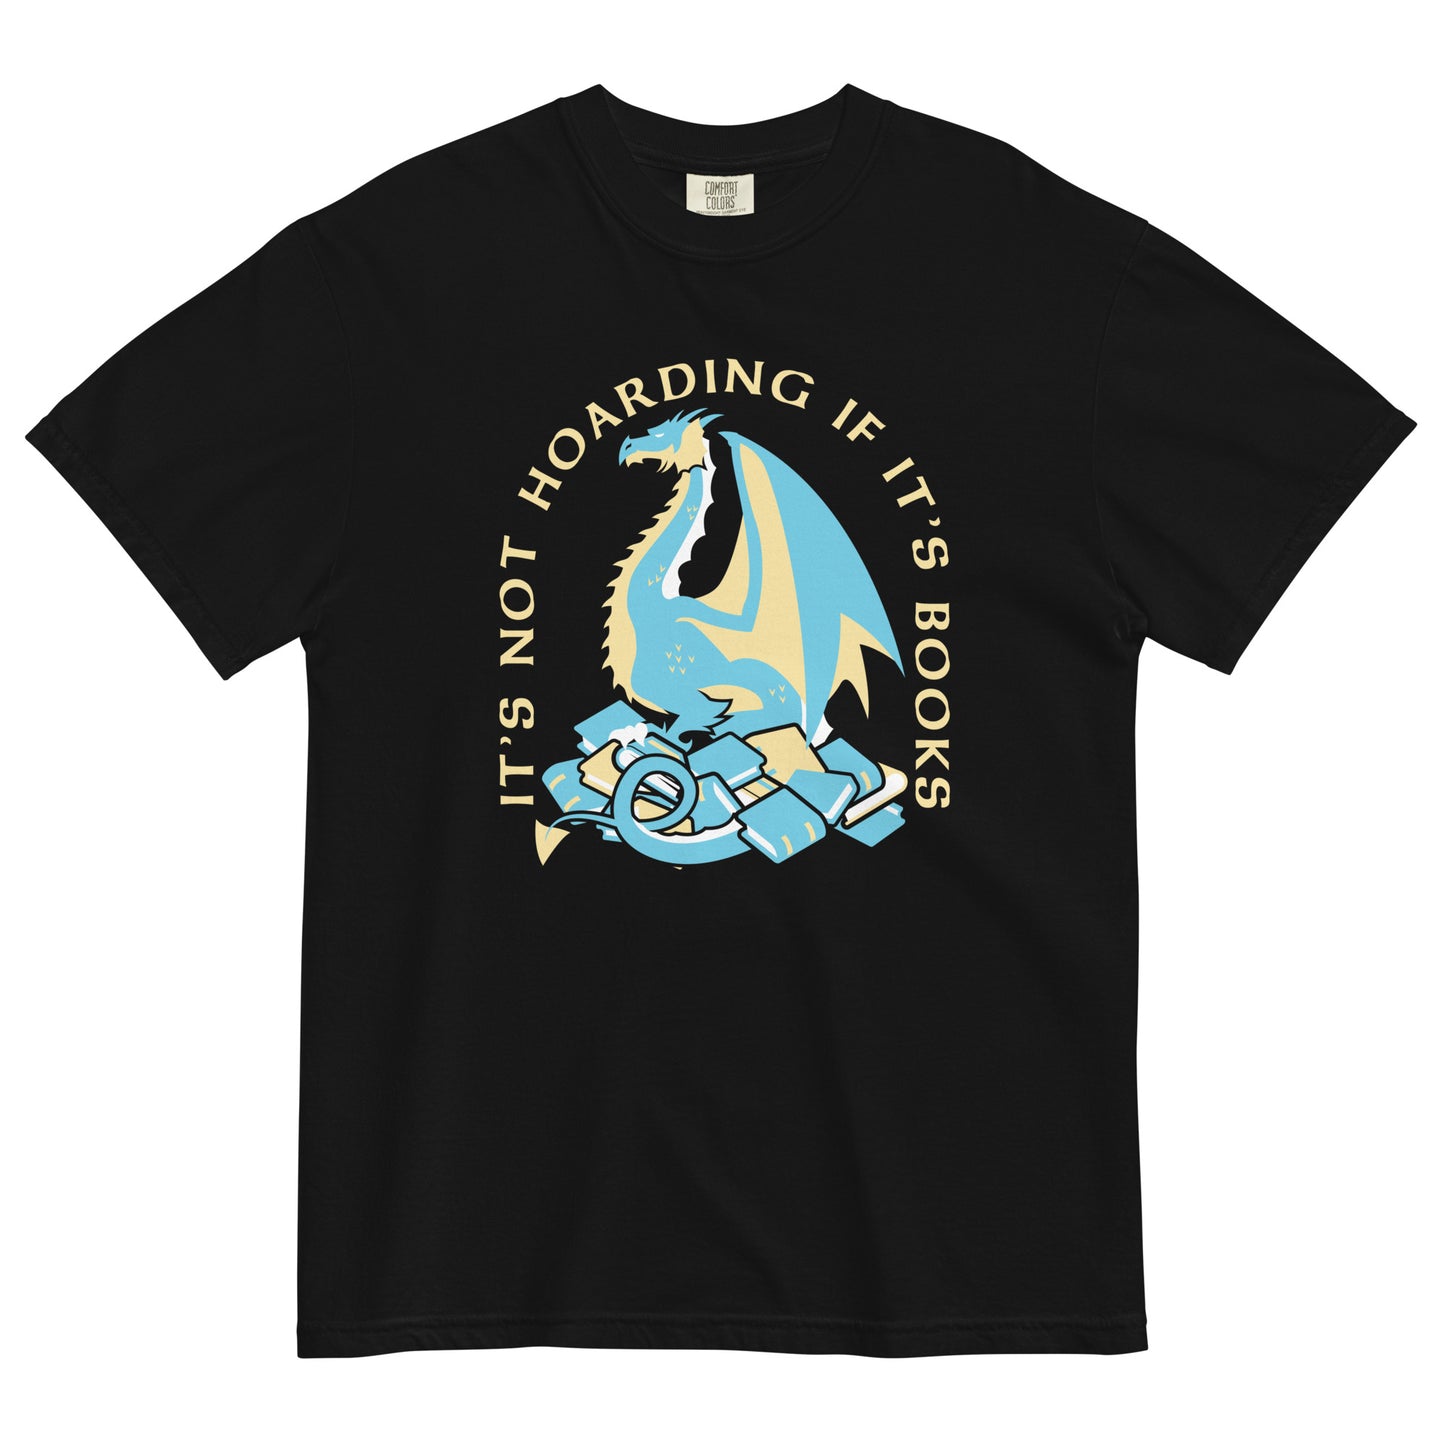 It's Not Hoarding If It's Books Men's Relaxed Fit Tee